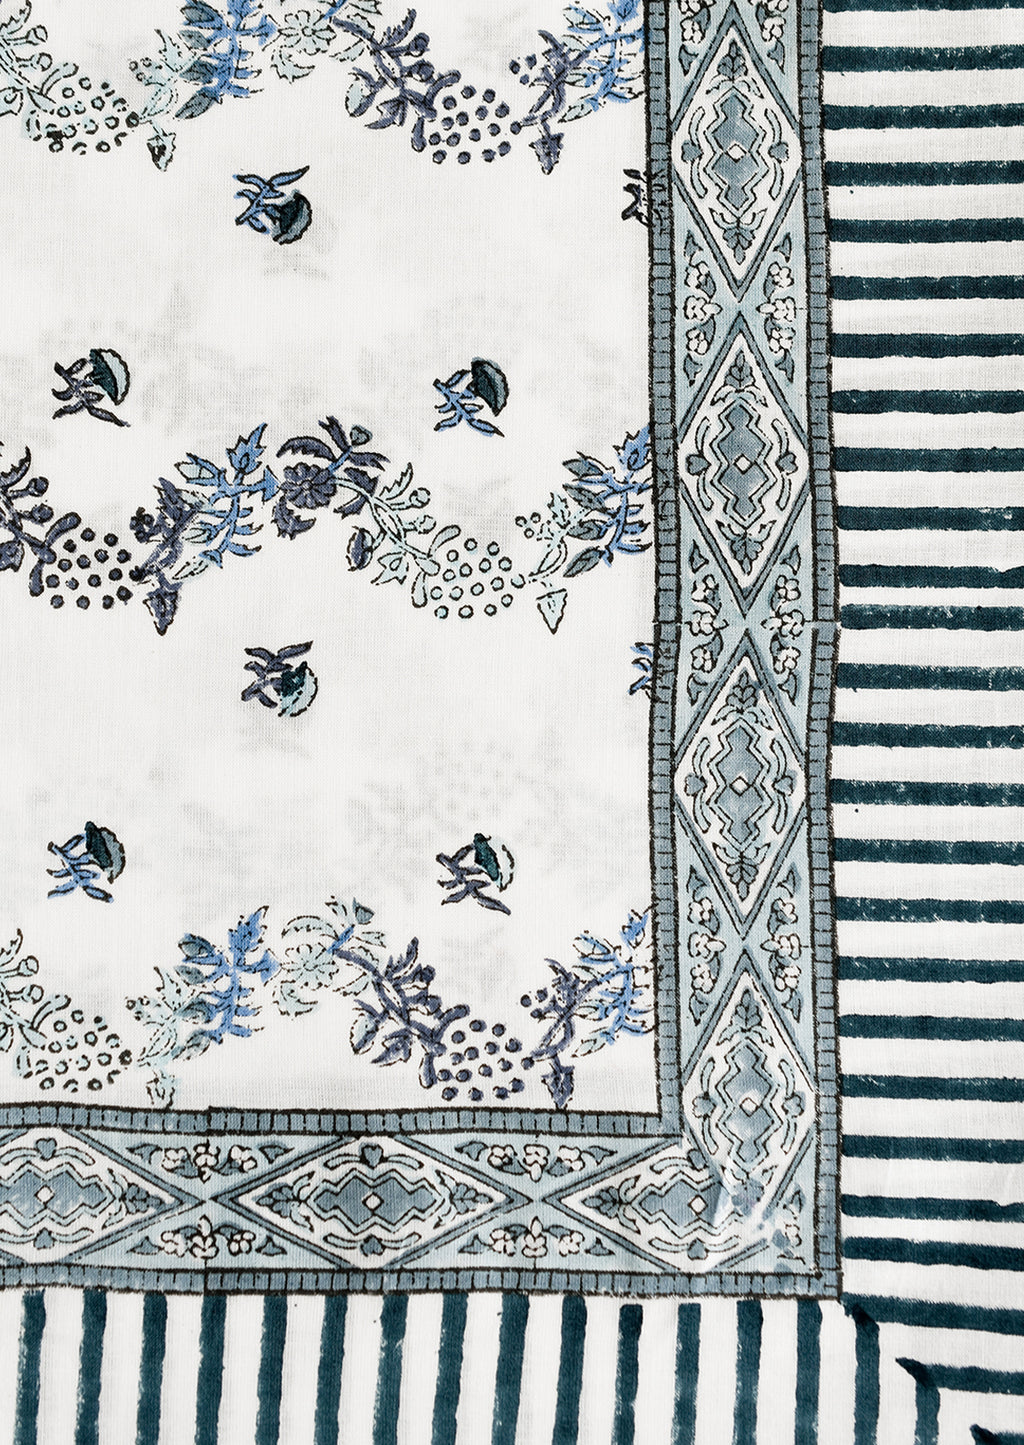 3: A block printed floral tablecloth in white and blue.